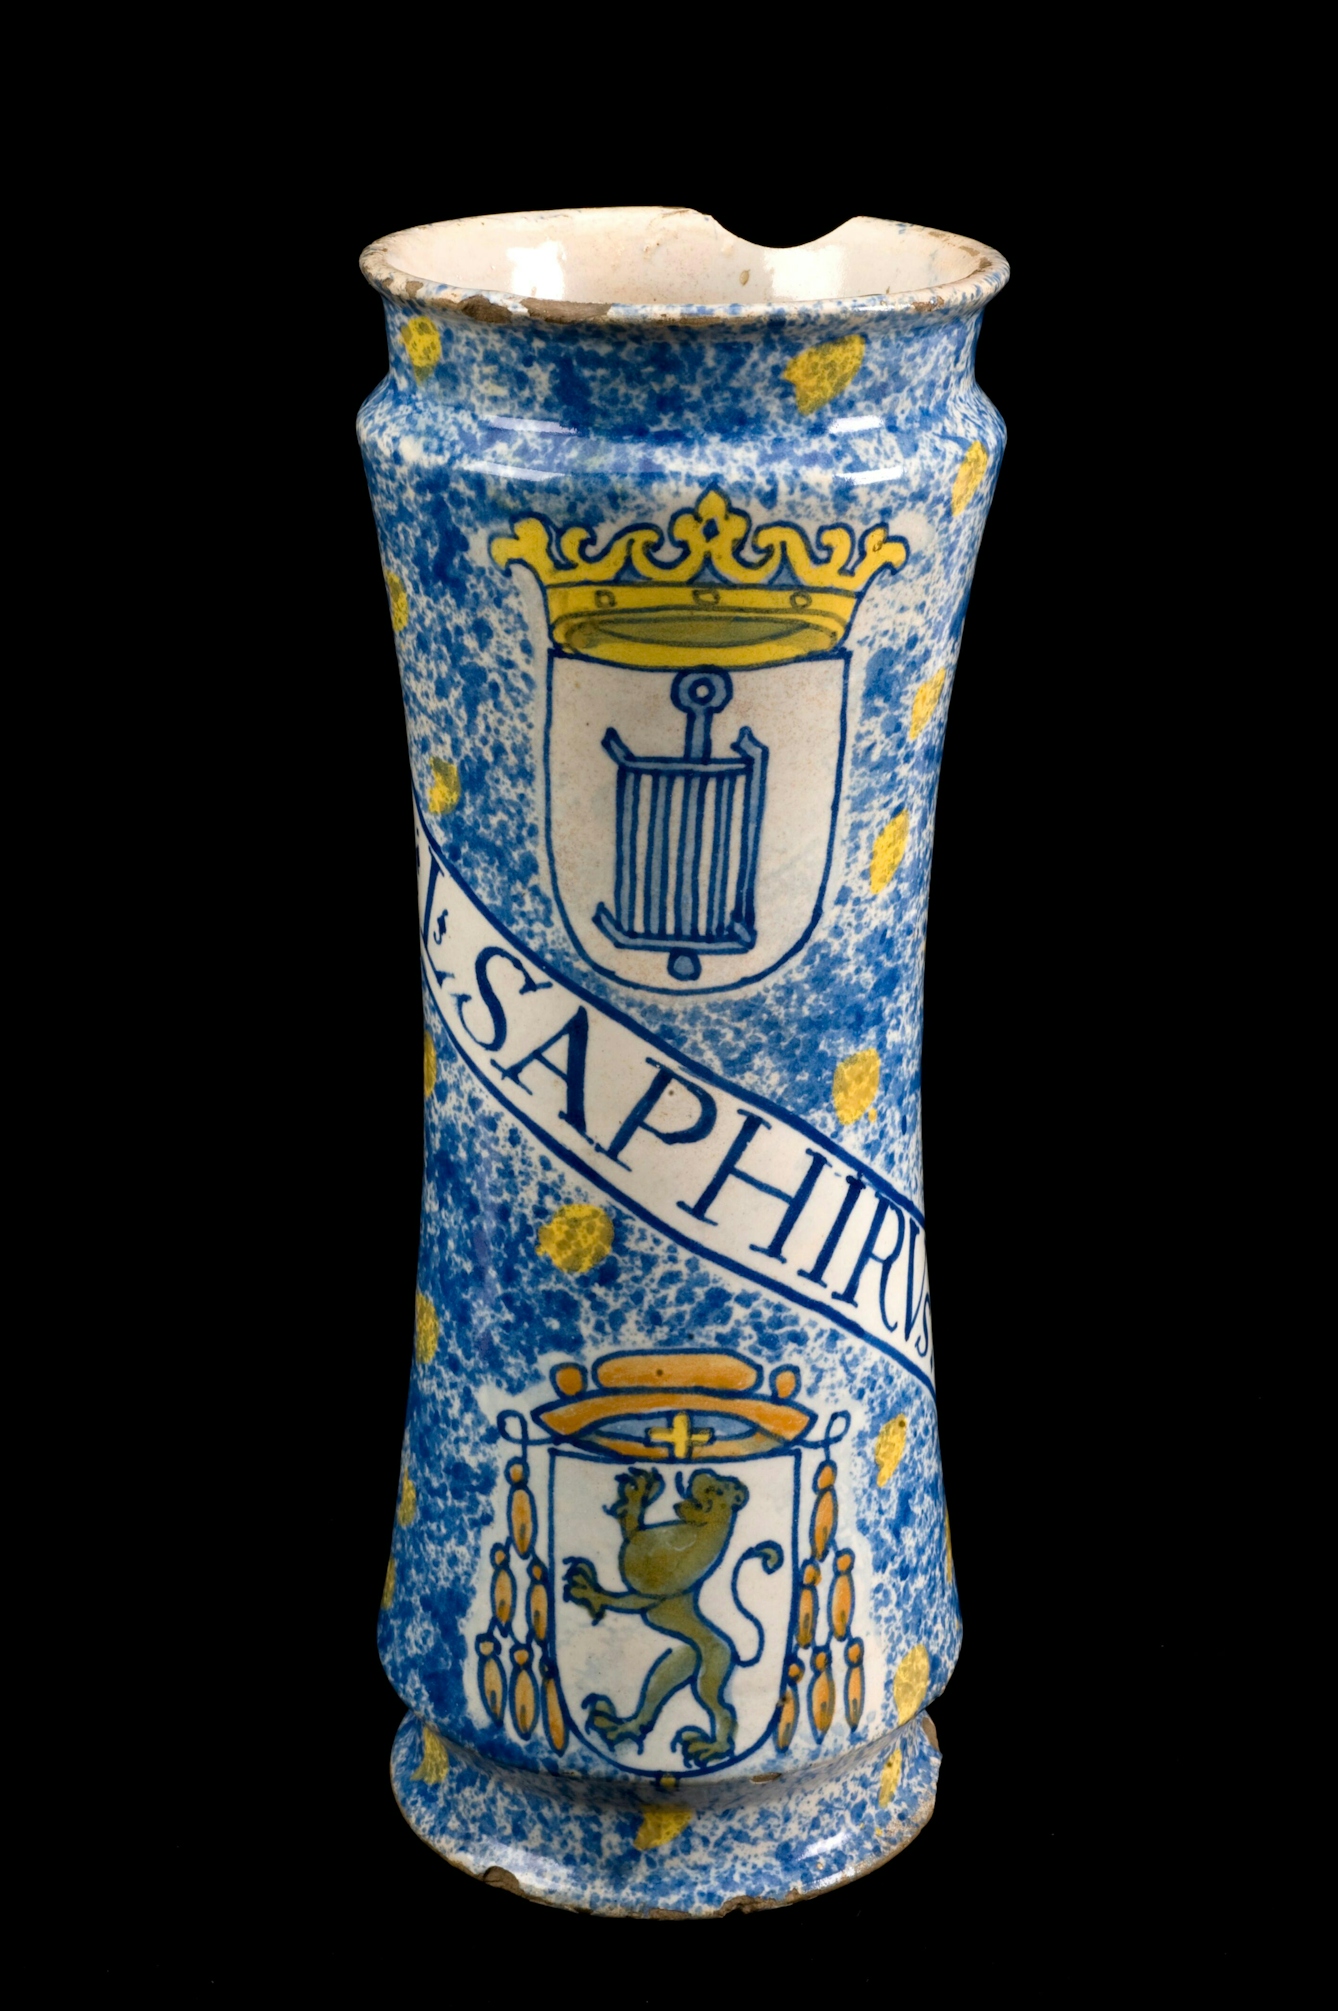 Photograph of a ceramic jar against a black background. The jar is hand painted with blue and yellow patterned elements  and symbols of a crown and a lion in a crest. Across the jar are the letters, "L SAPHIRV..."